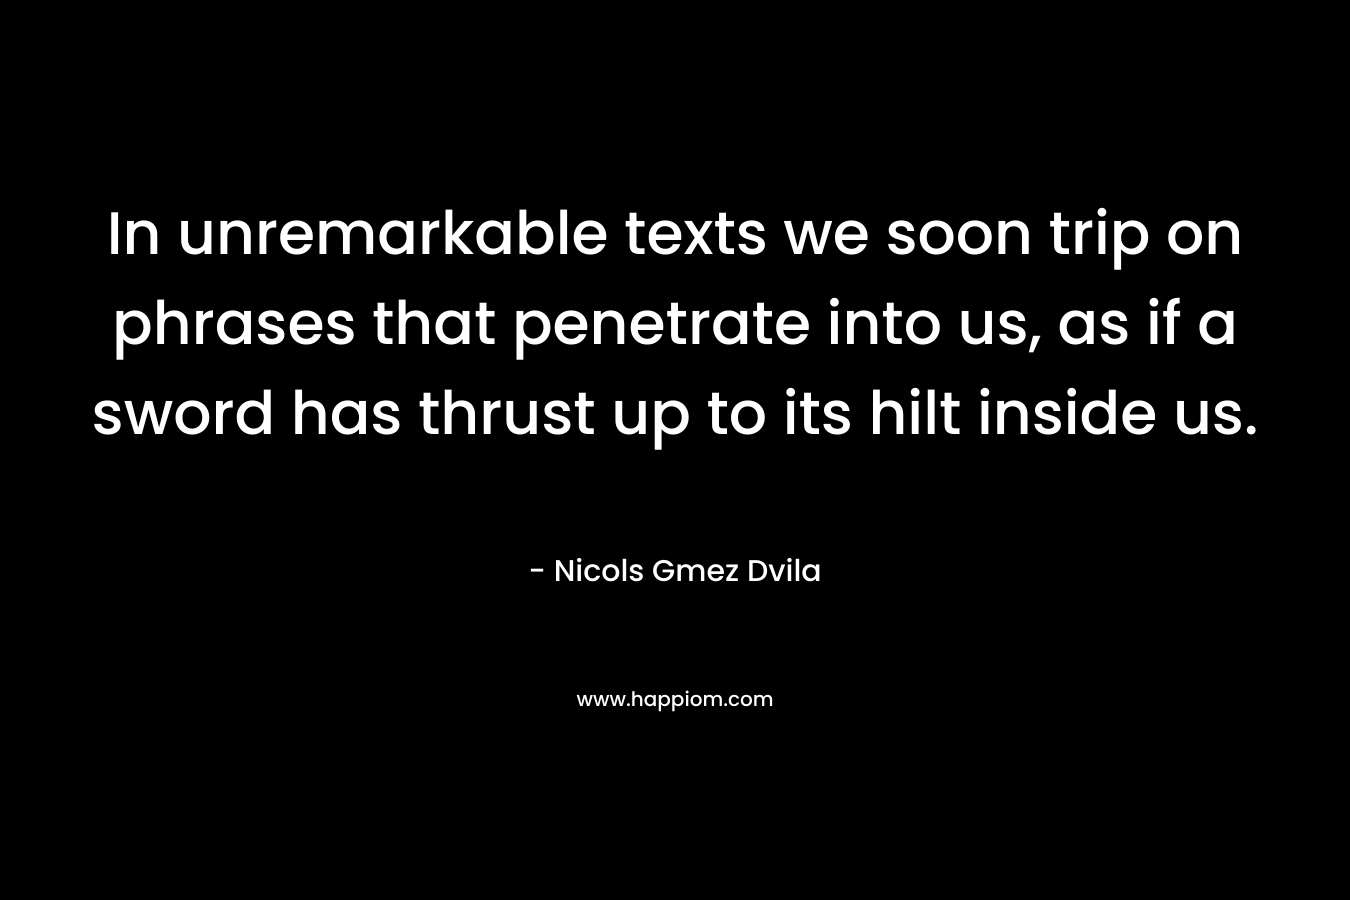 In unremarkable texts we soon trip on phrases that penetrate into us, as if a sword has thrust up to its hilt inside us. – Nicols Gmez Dvila